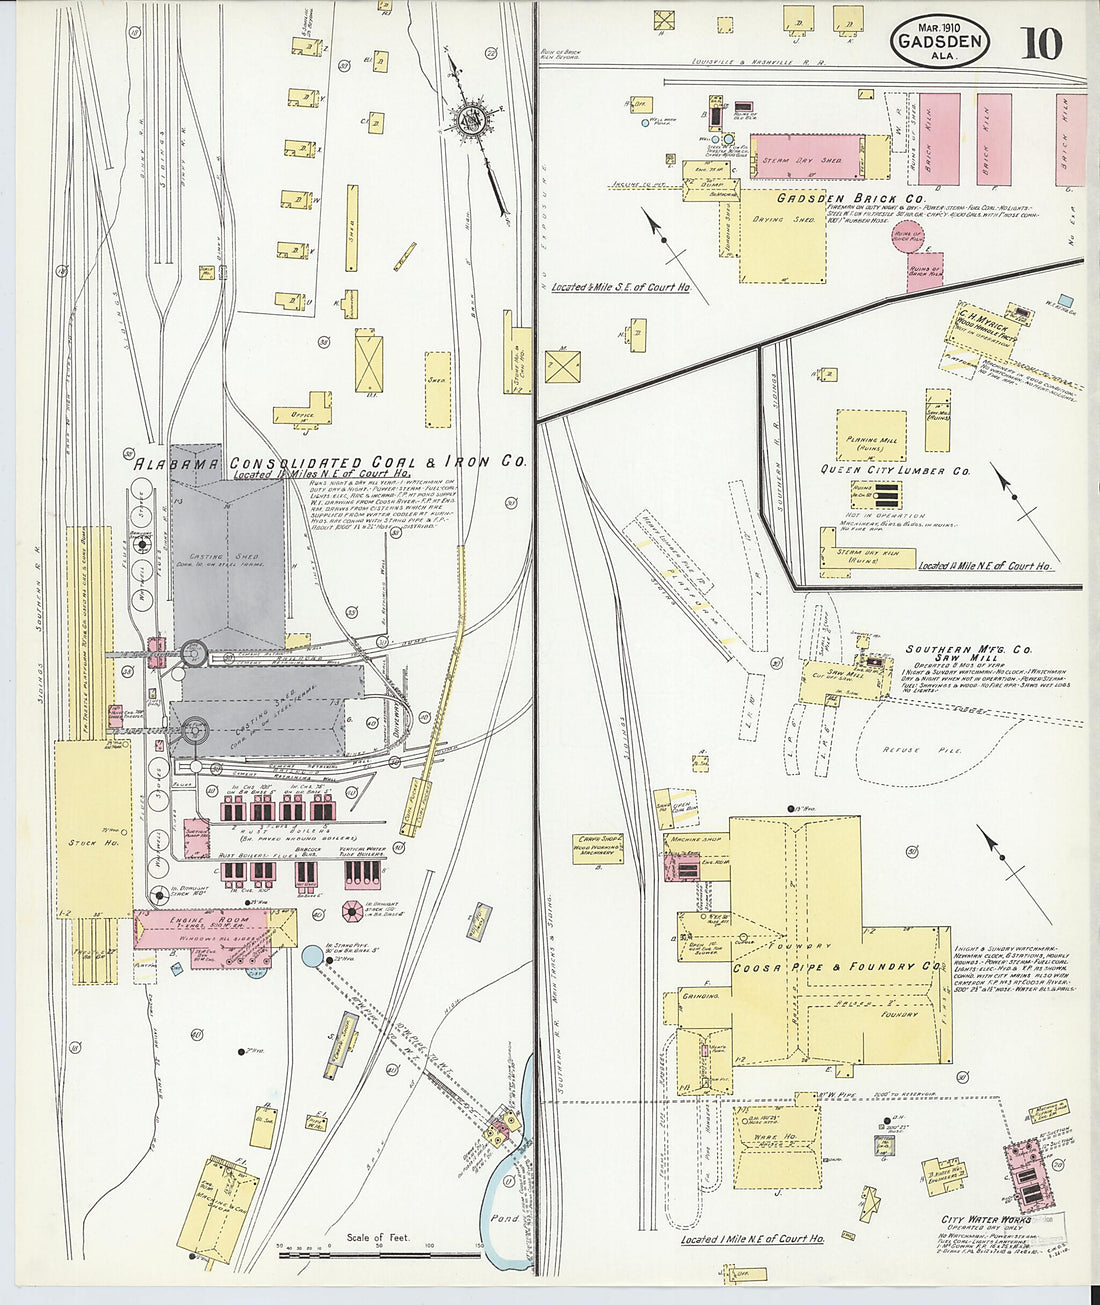 This old map of Gadsden, Etowah County, Alabama was created by Sanborn Map Company in 1910